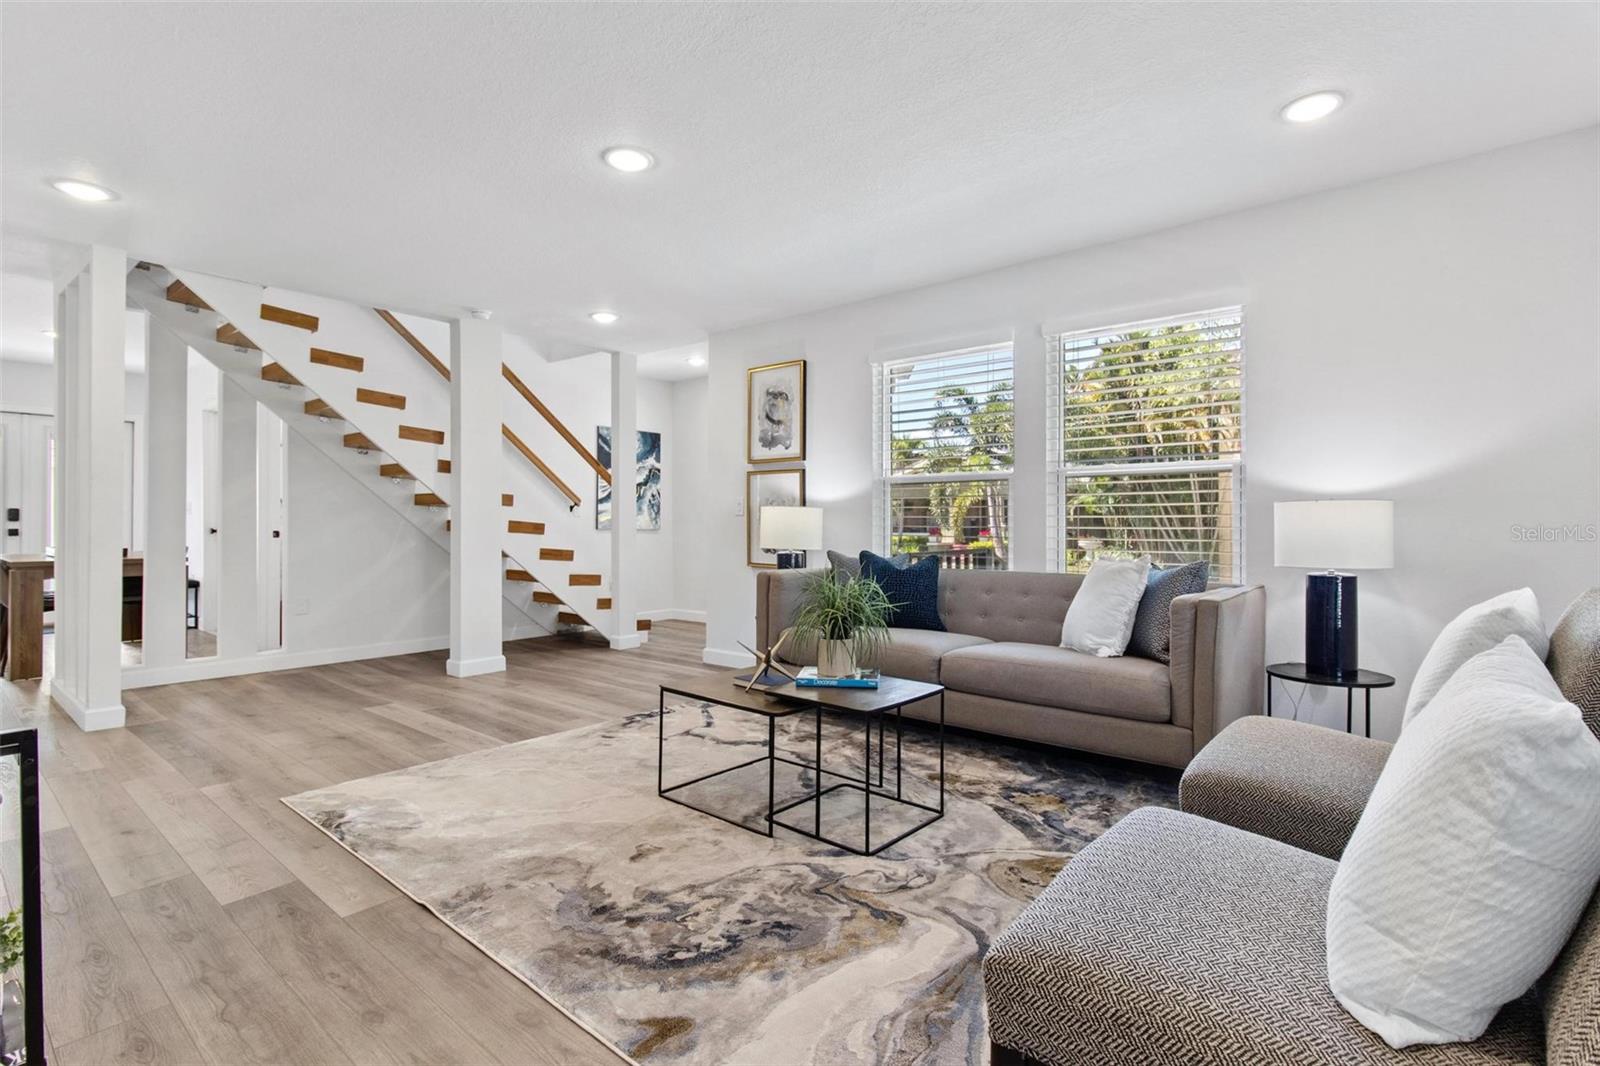 Walk to the open living area, appreciate the floating staircase, luxury vinyl, recessed LED lights and many windows for natural light.